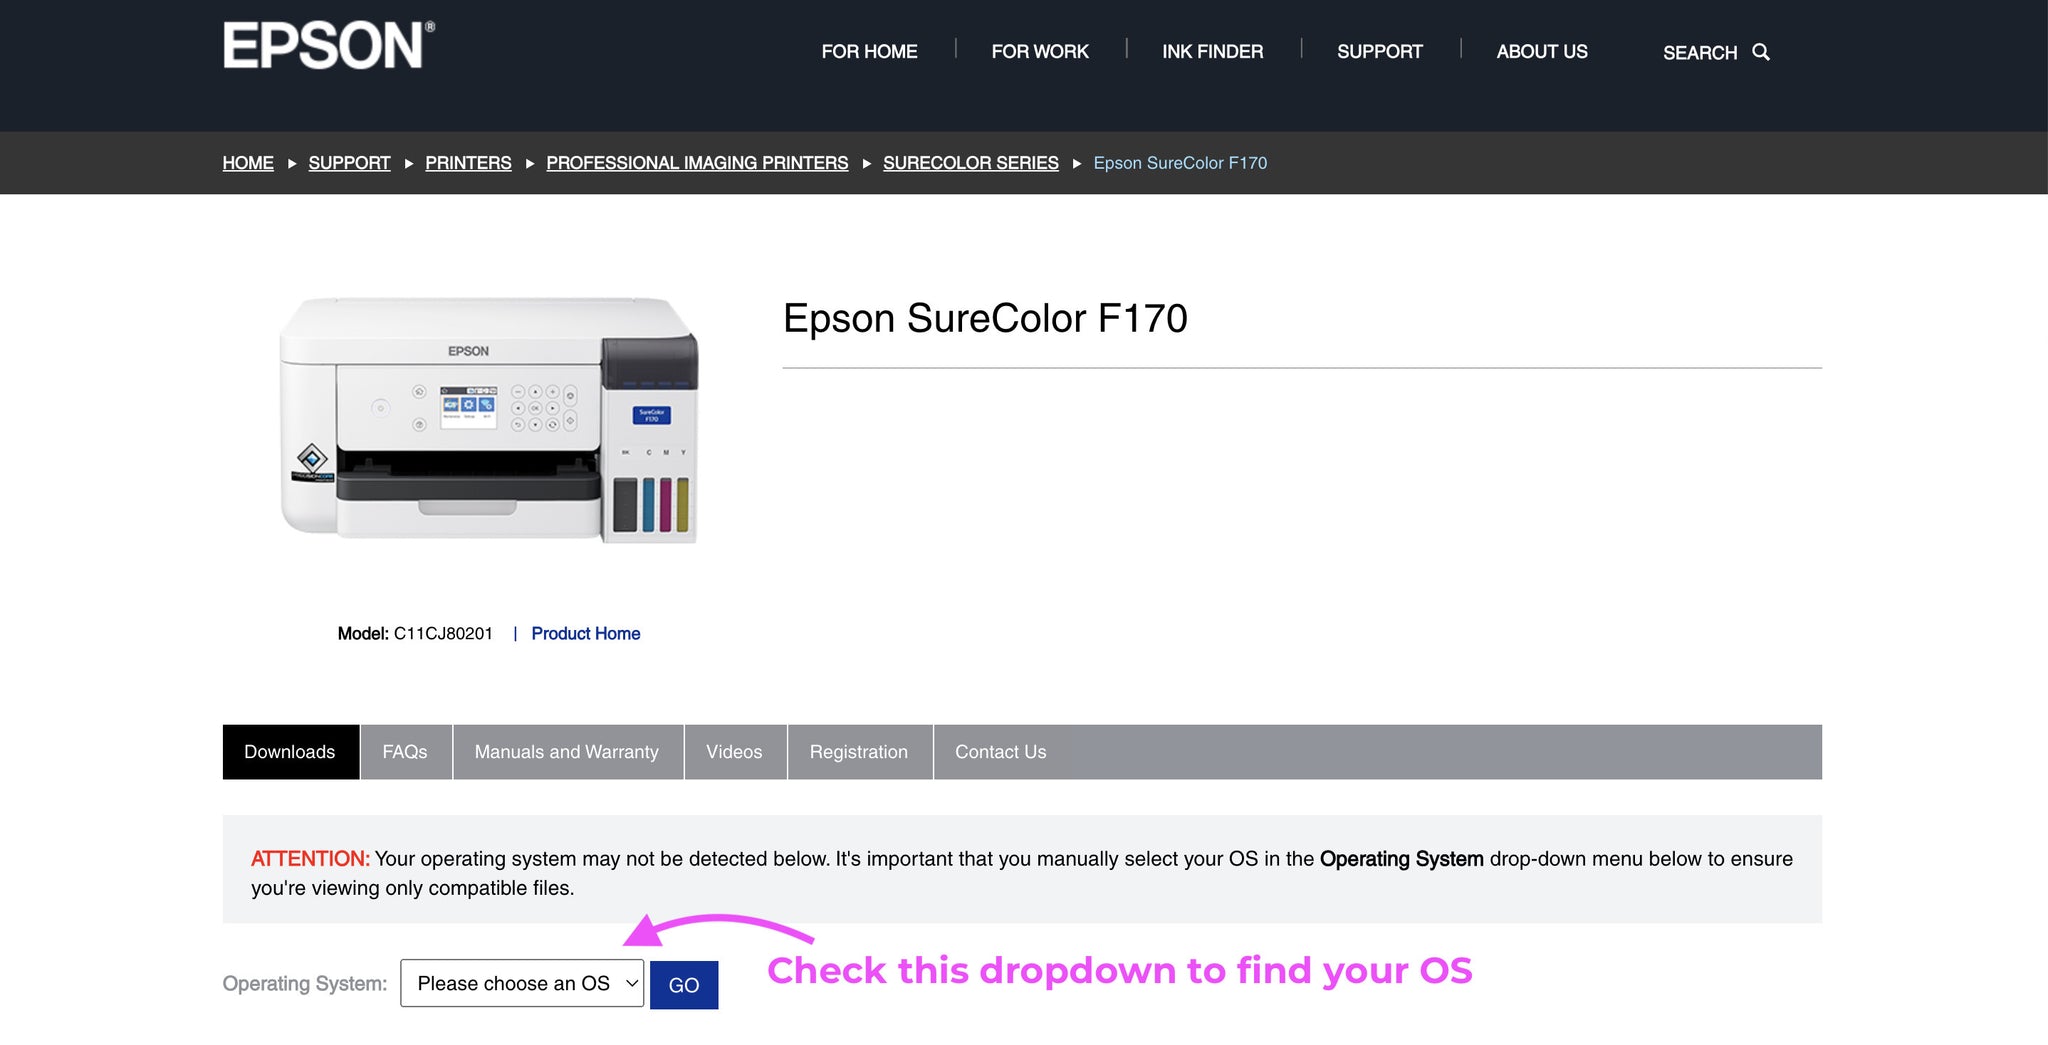 Finding your OS to install Epson printer driver